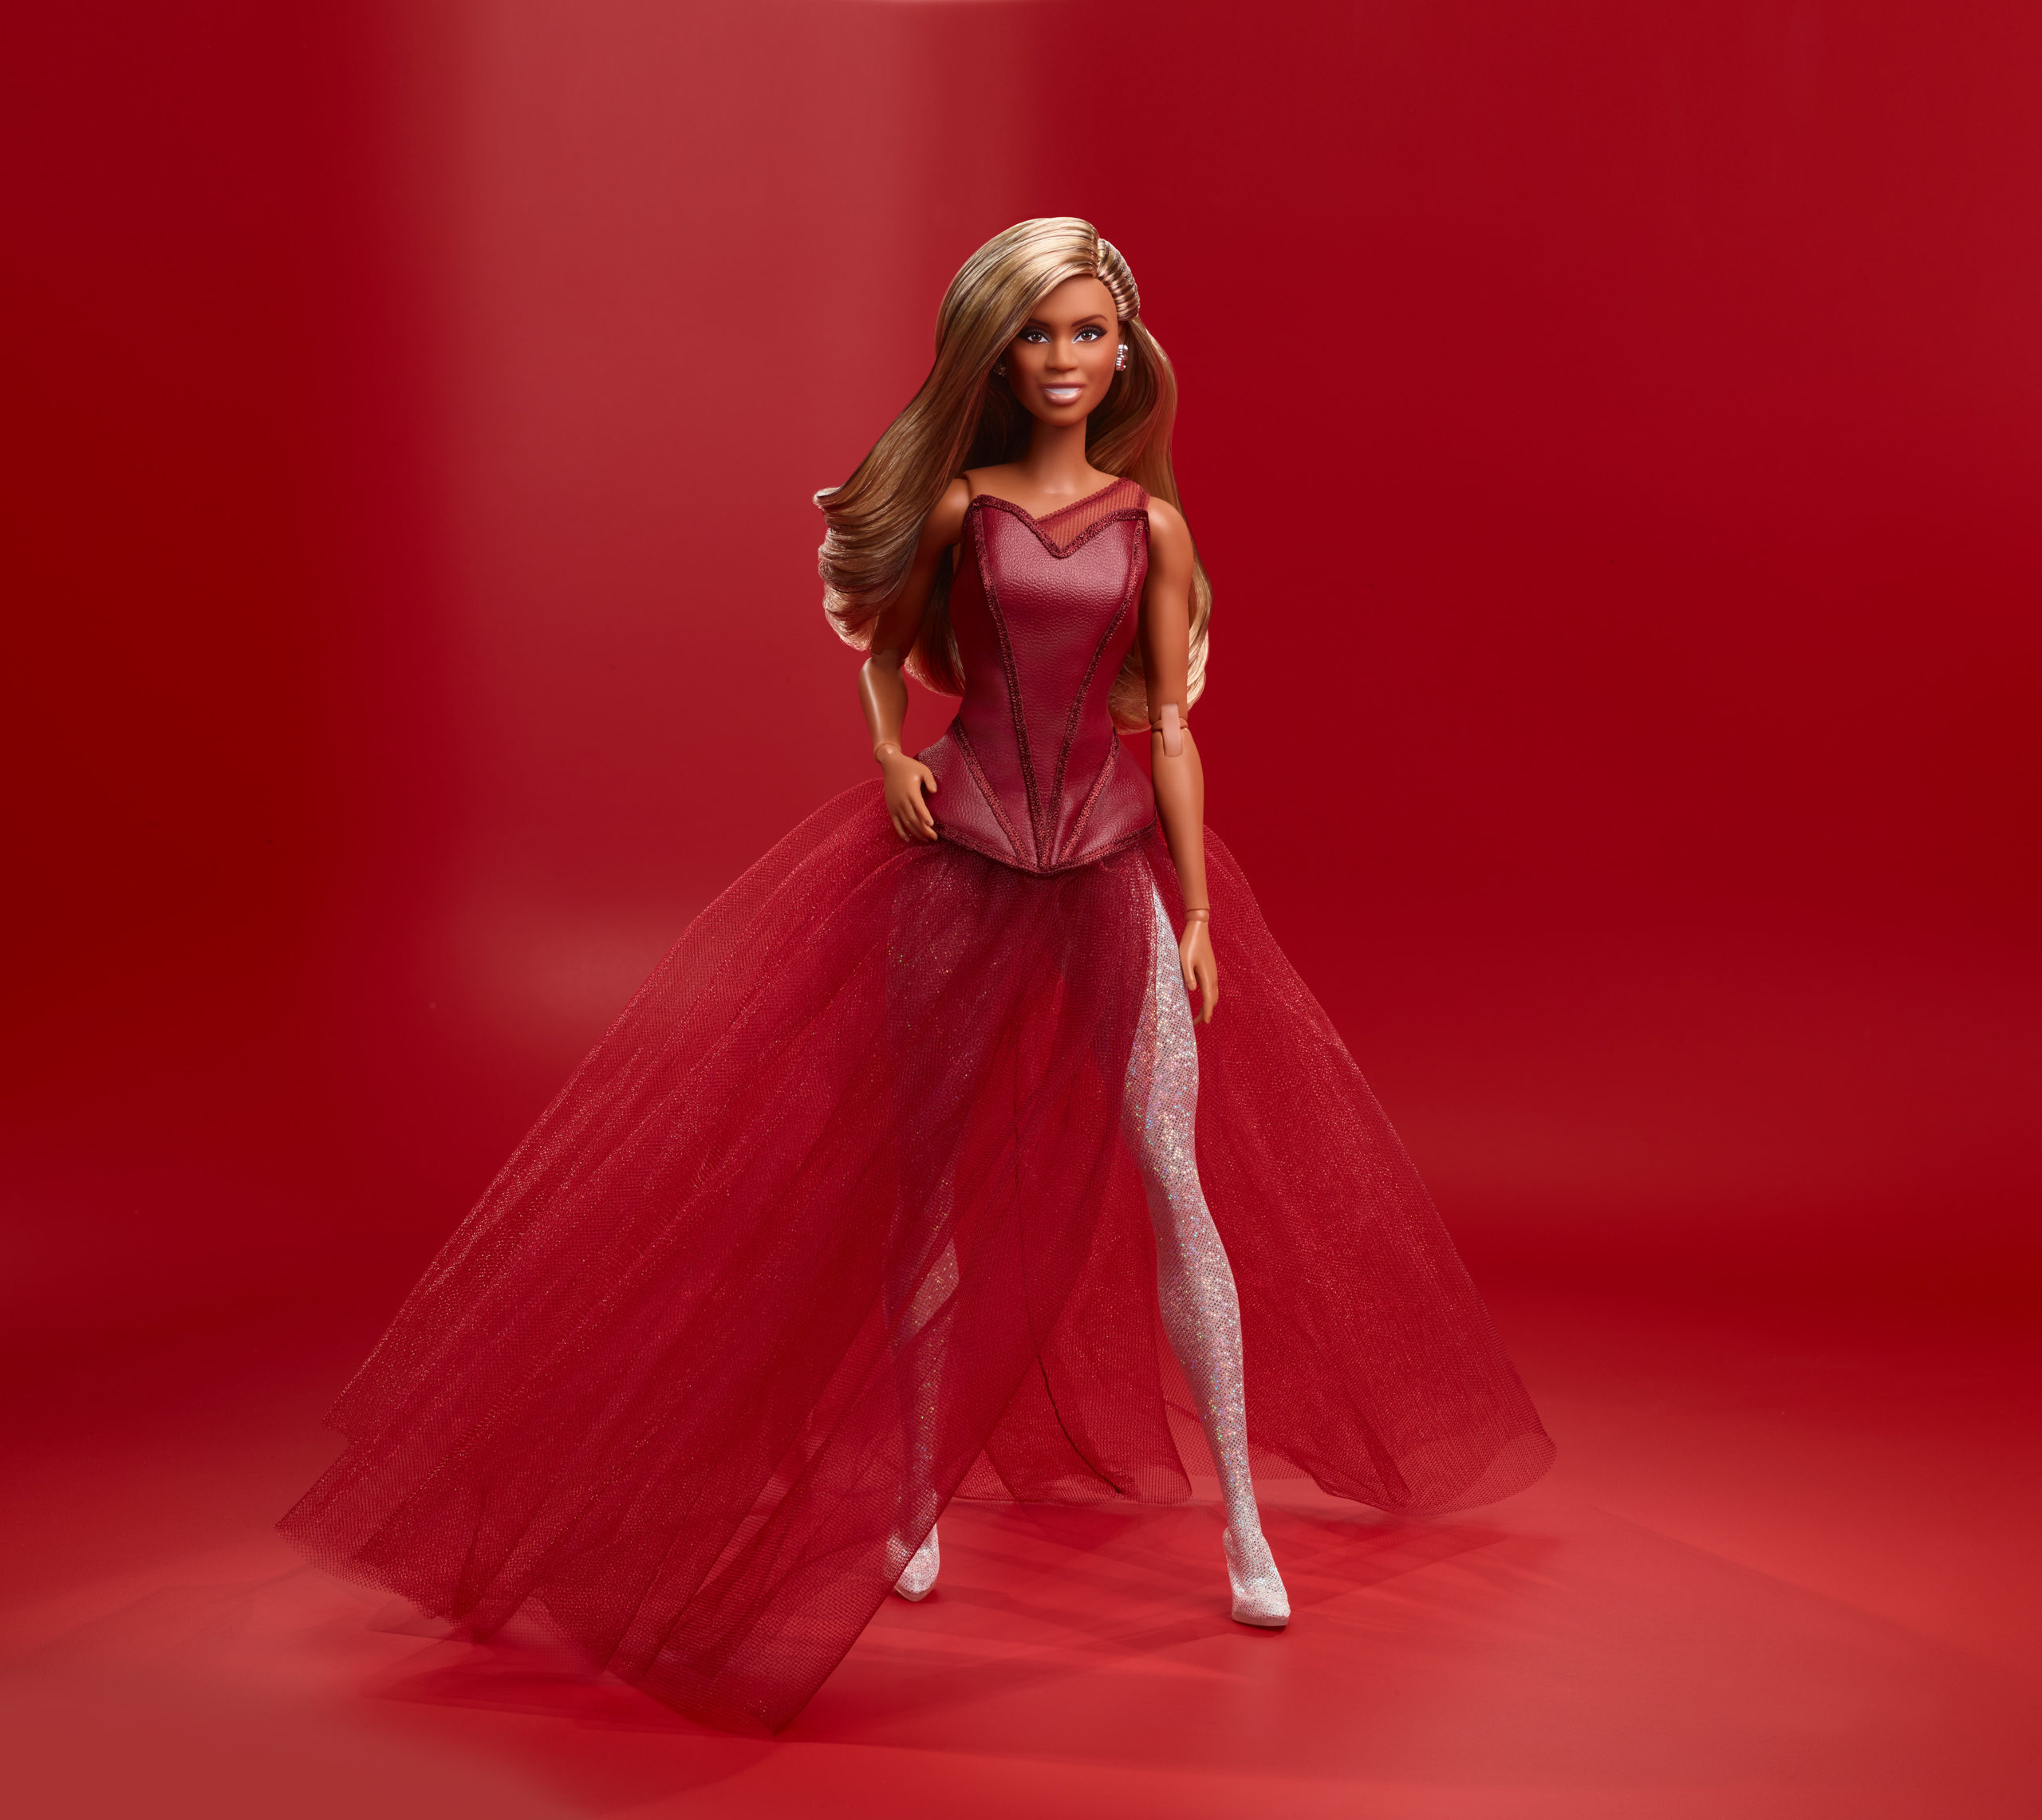 merican actress and LGBTQ+ activist, Laverne Cox joined Mattel Creations’ Barbie Tribute Collection with her new doll. 